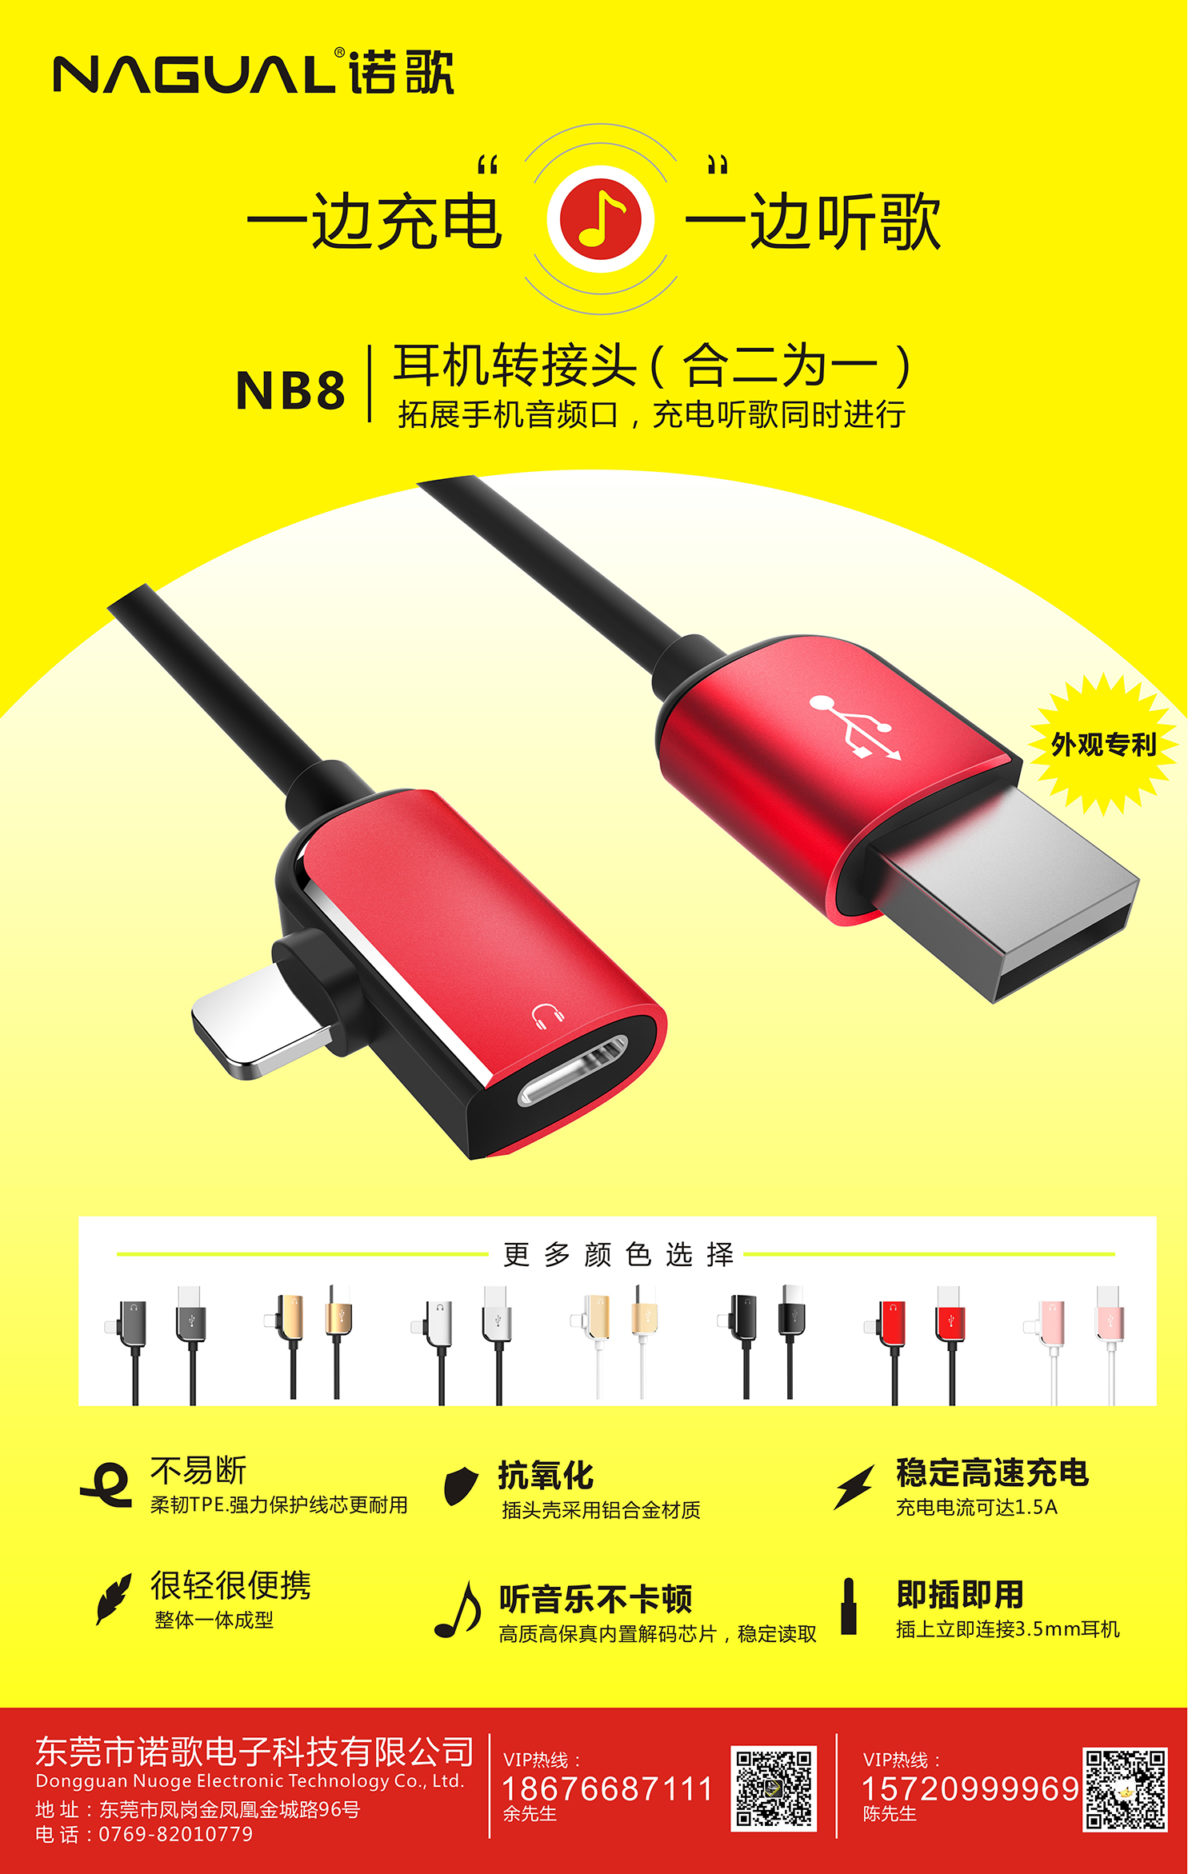 8748#-iPhone-earphone-adapter-charger&music-2in1-J1-details